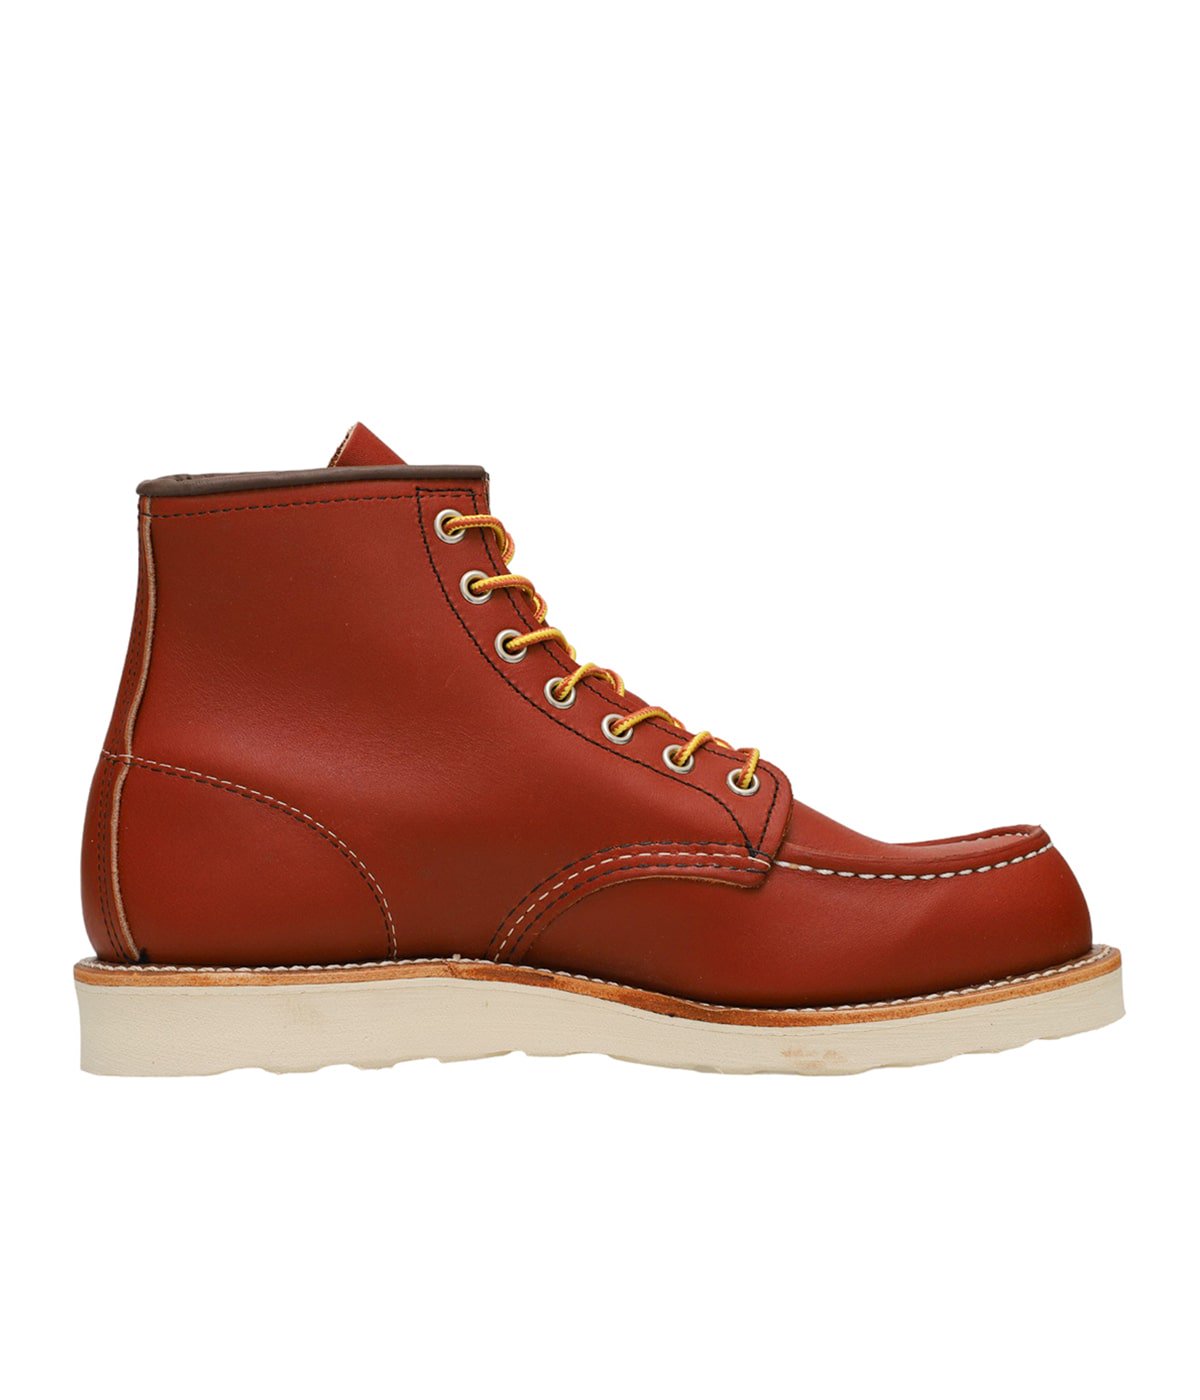 CLASSIC MOC STYLE NO.8875 | RED WING(レッドウィング) / シューズ 